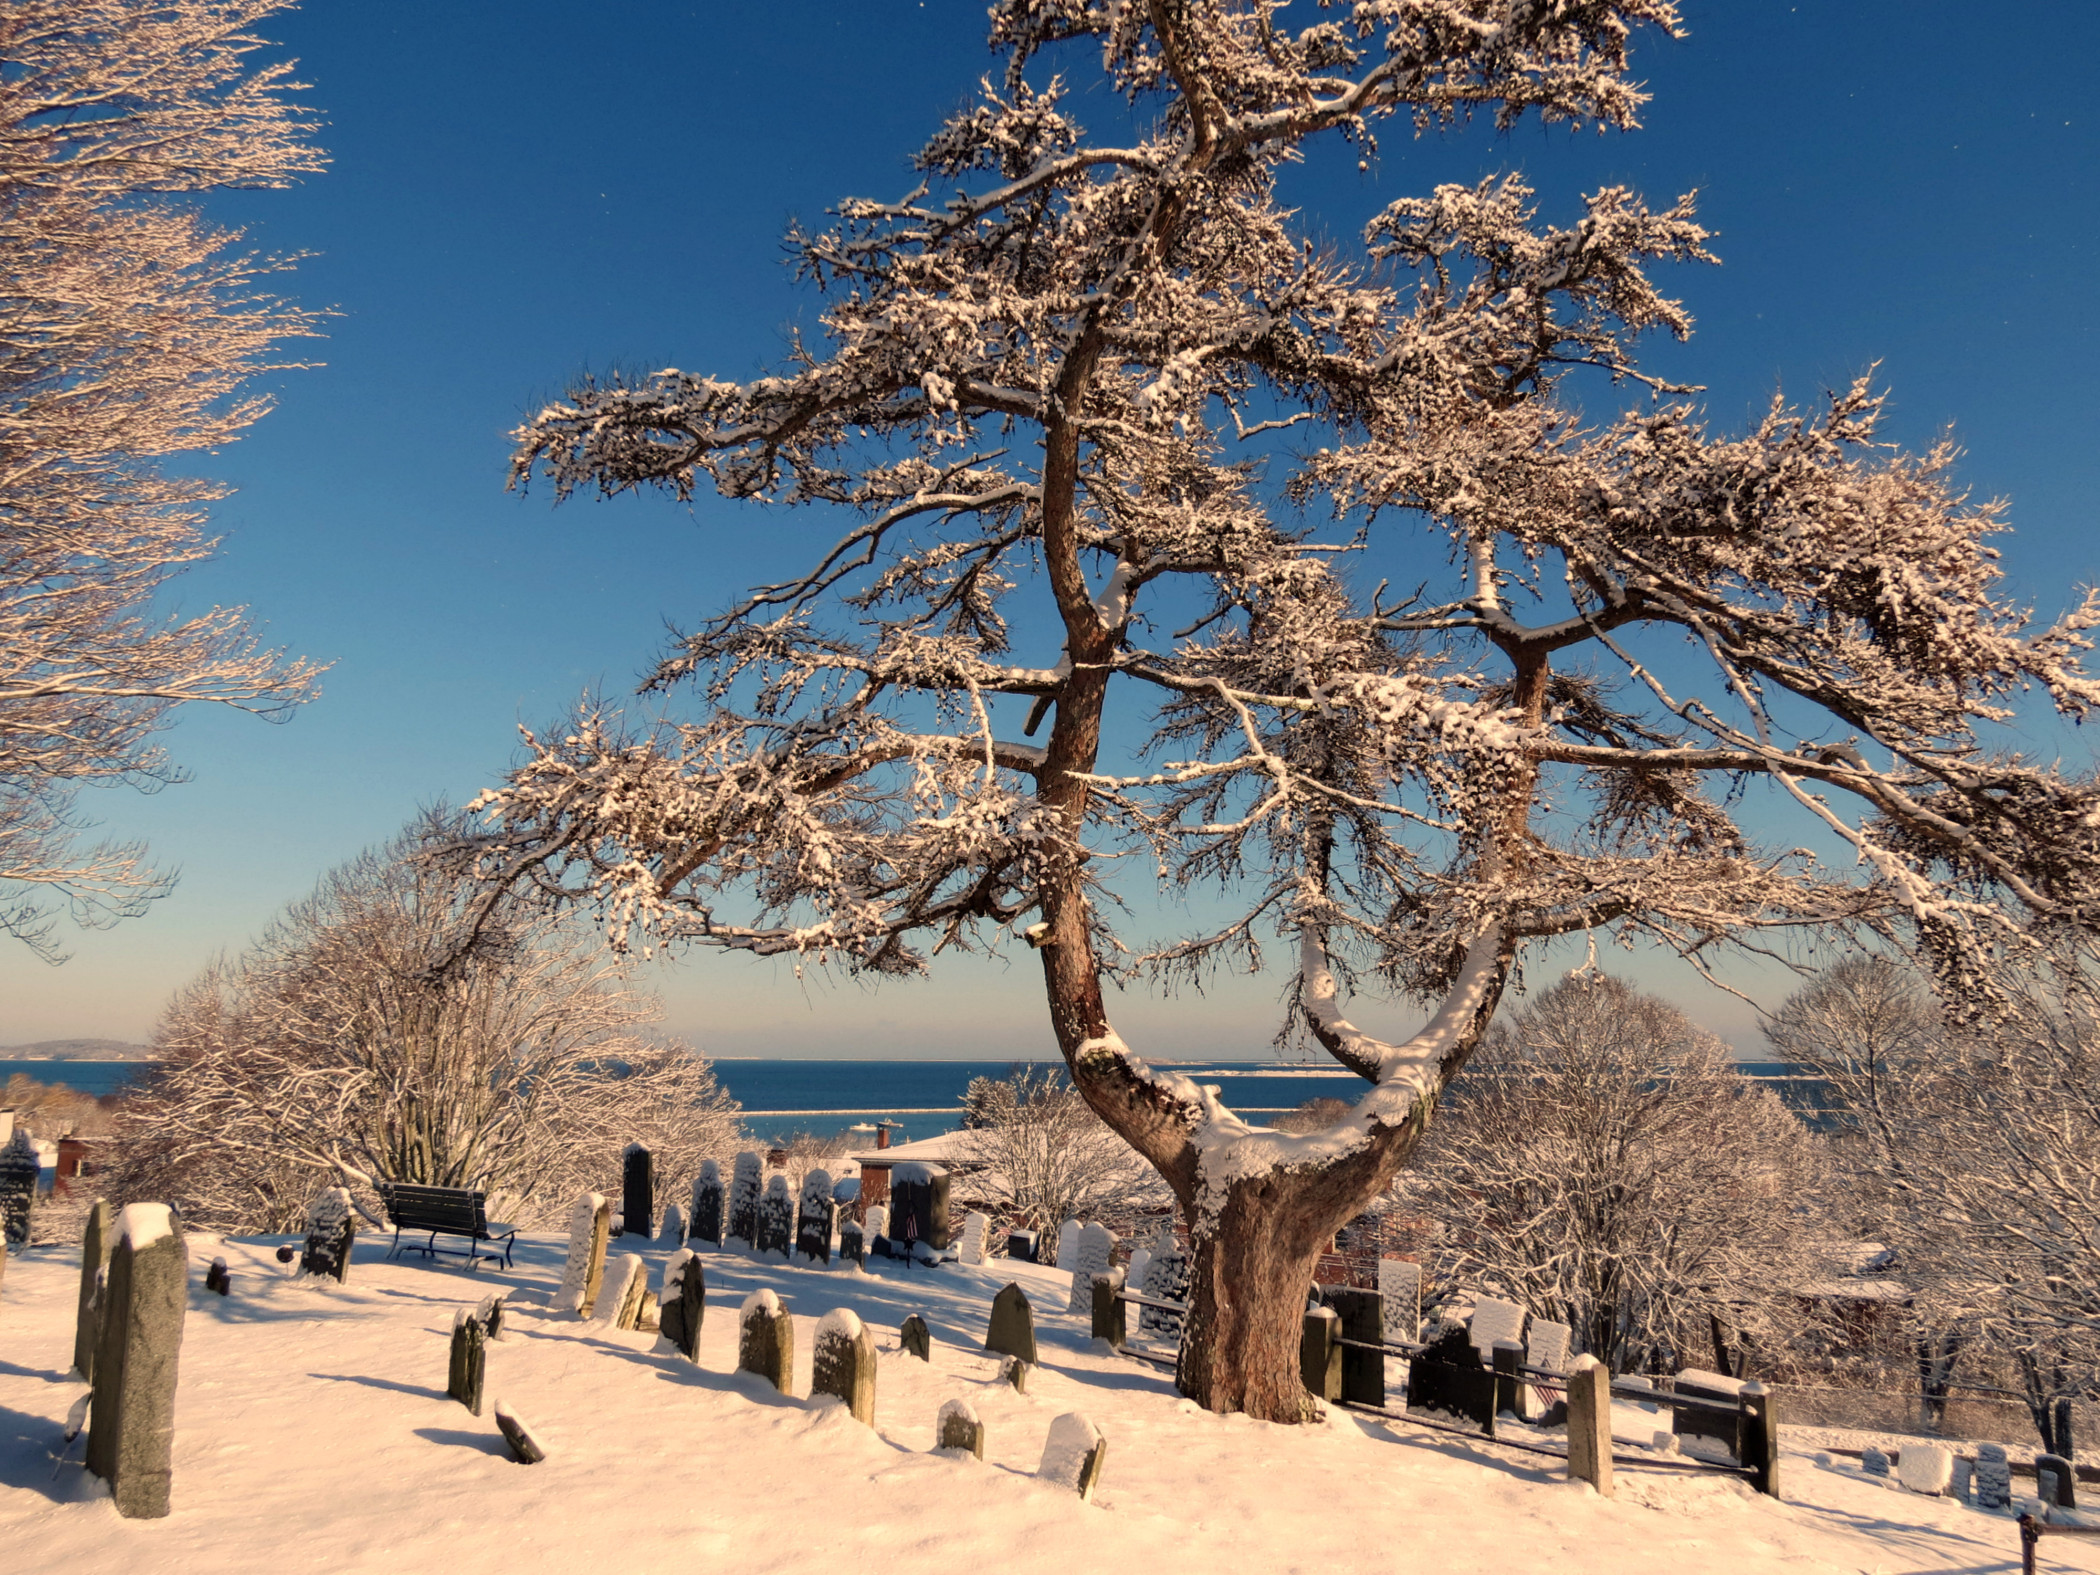 Snowy Cemetery (user submitted)